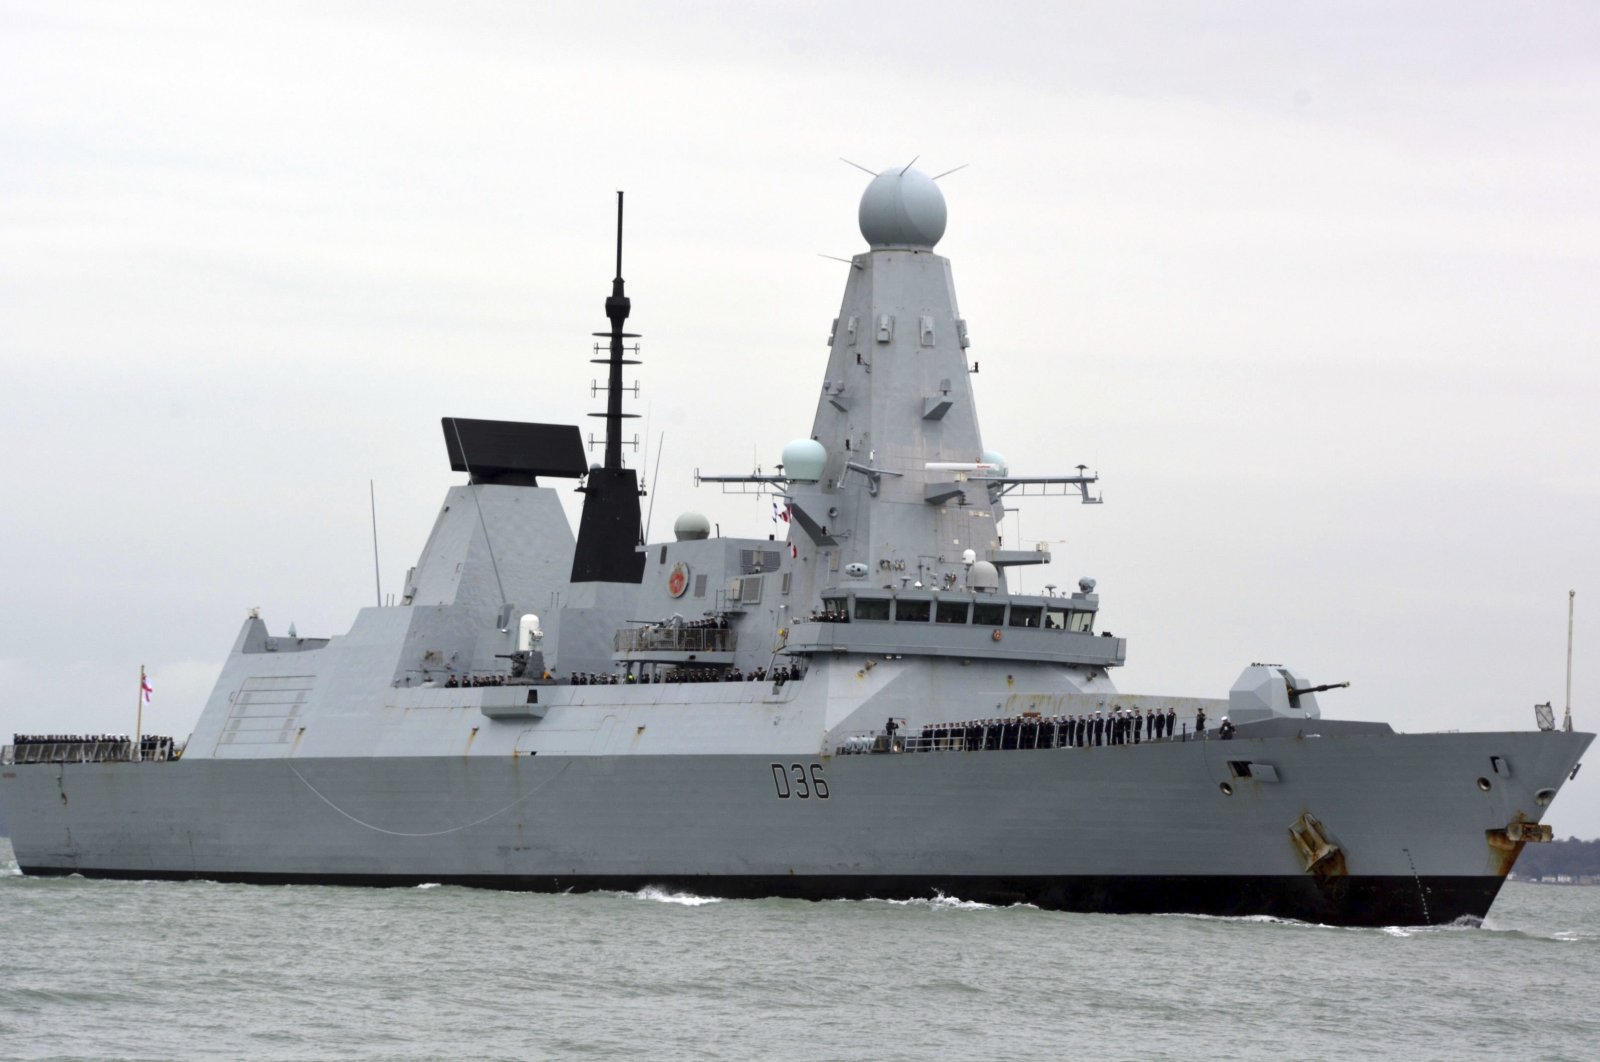 The British HMS Defender sails in Portsmouth, England, March 20, 2020. (AP)